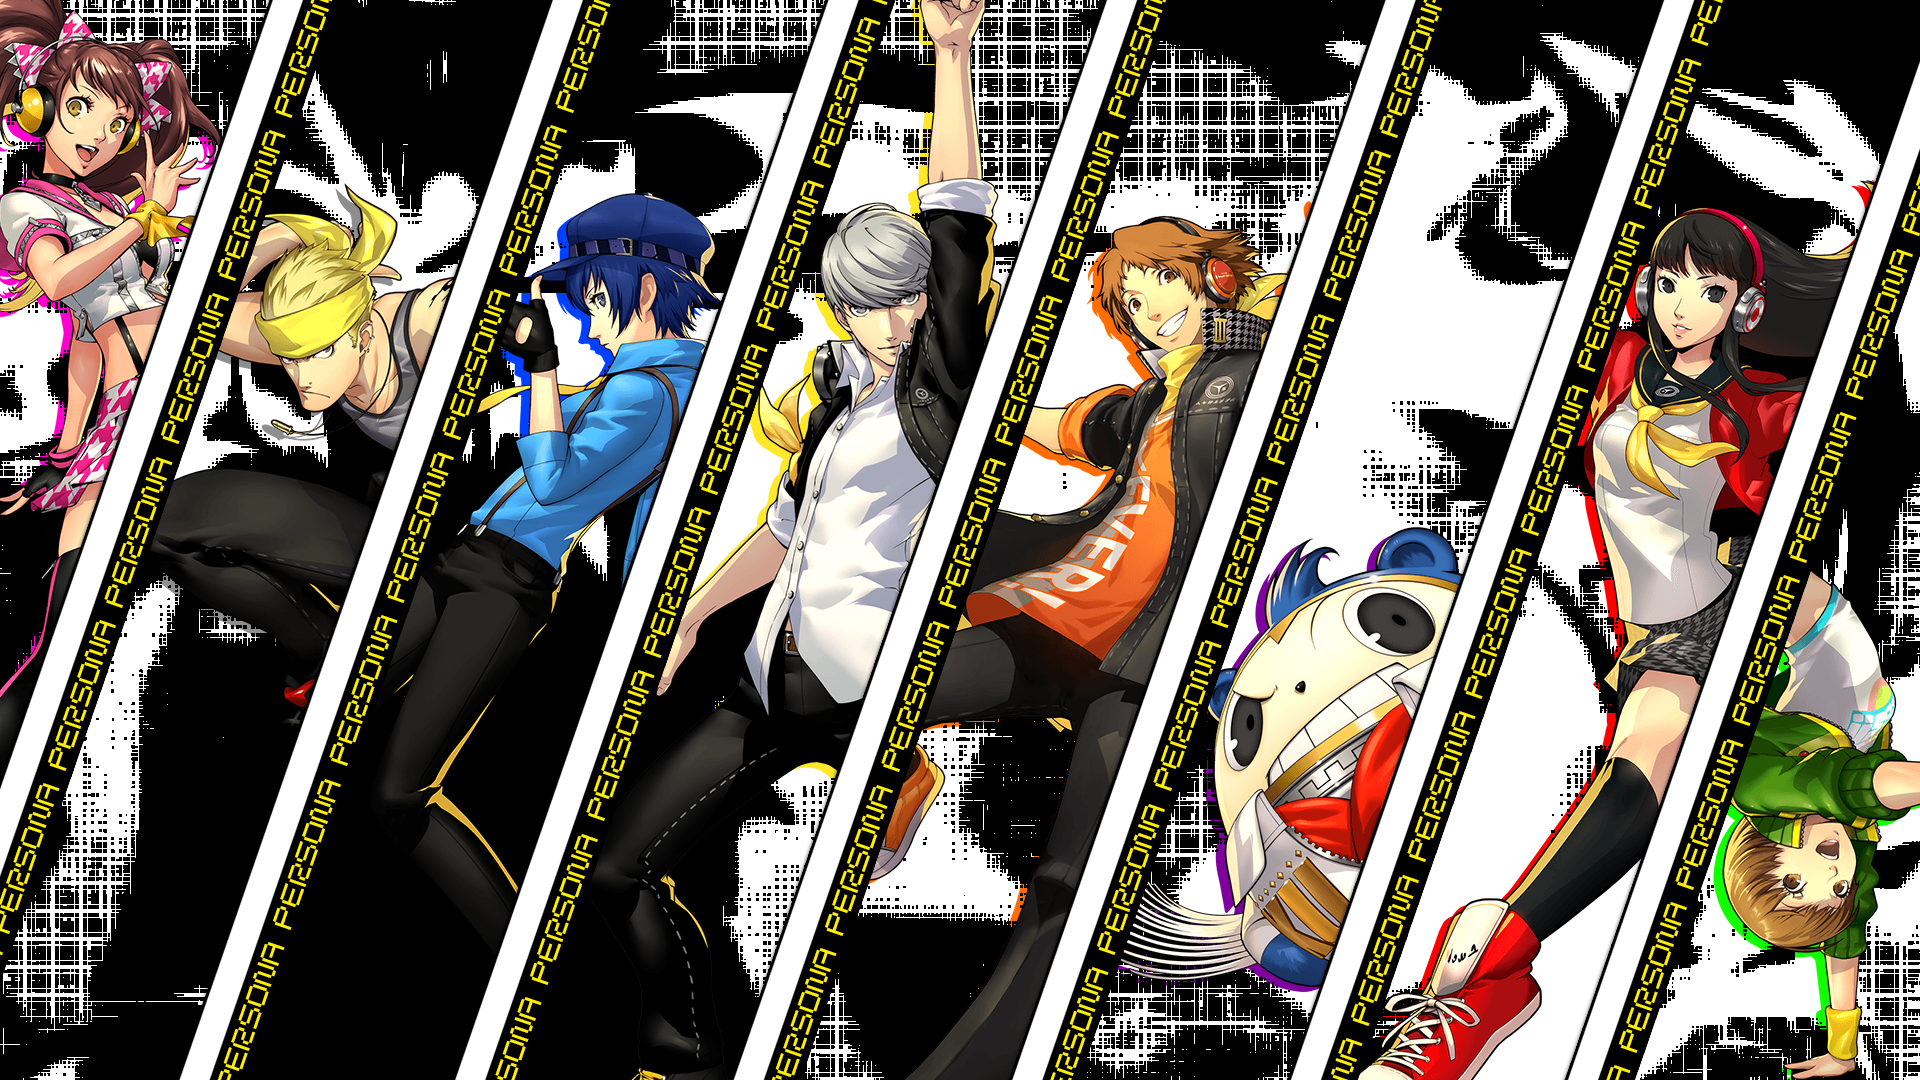 Persona 4: Dancing all Night - Party